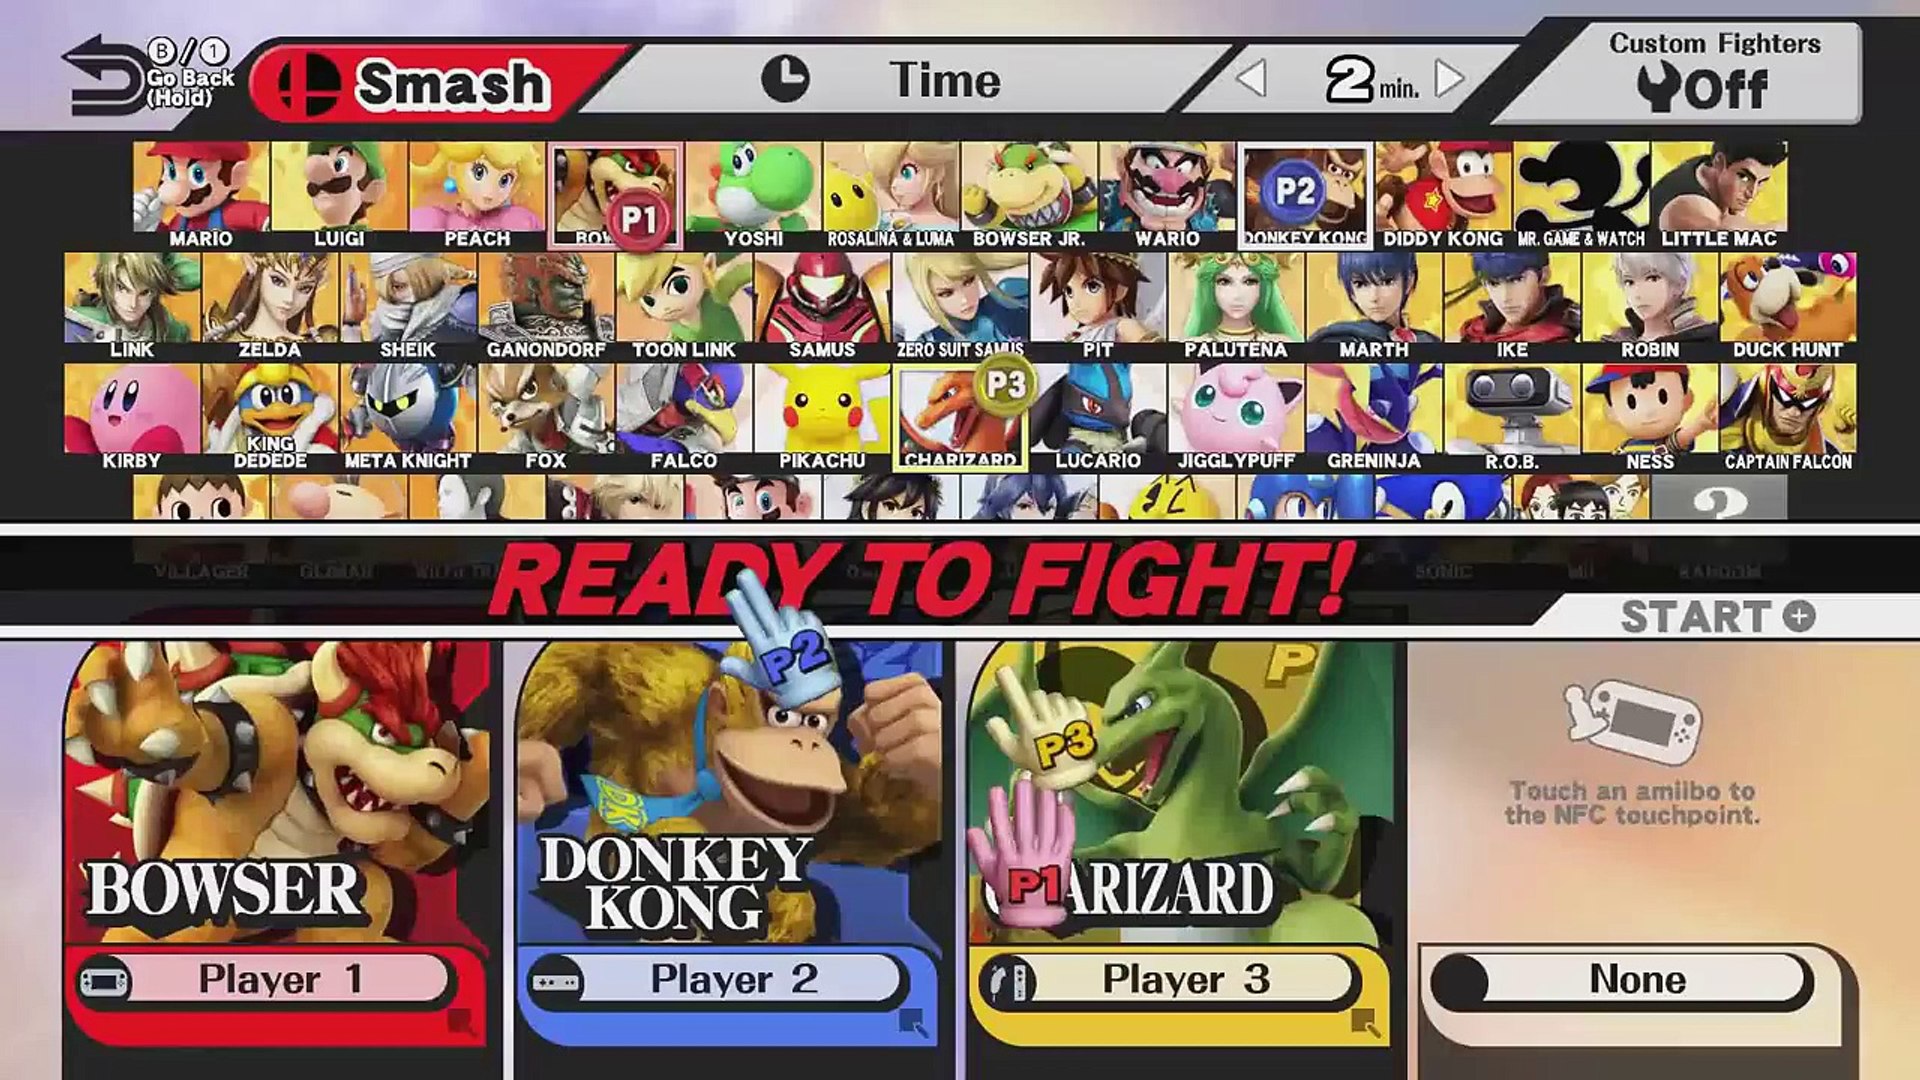 Super Smash Bros. Wii U Gameplay - Bowser, Donkey Kong and Charizard Free  Fight - video Dailymotion